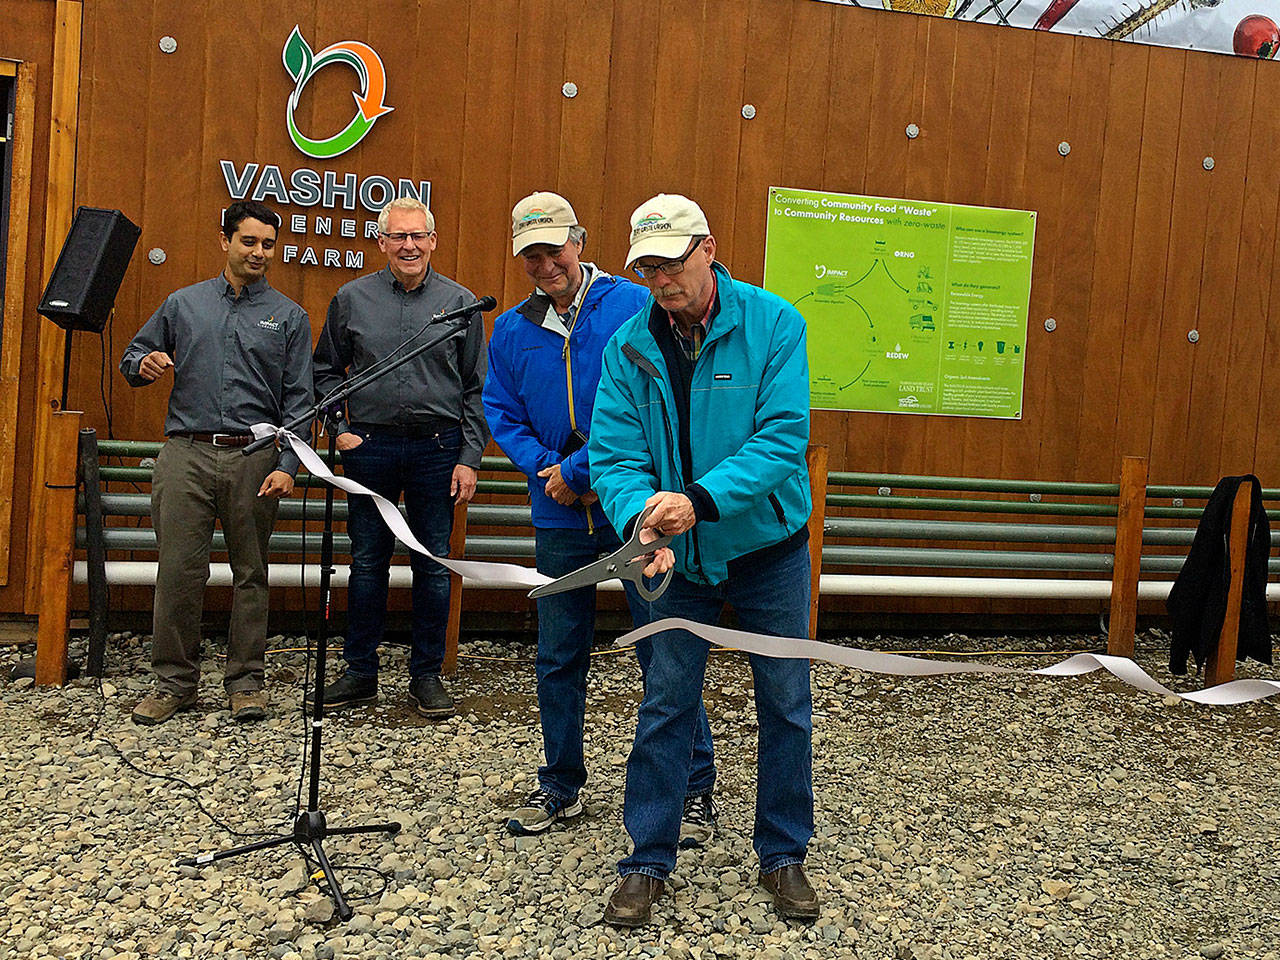 Gib Dammann, president of Zero Waste Vashon, cuts the ribbon on a new anaerobic digester unveiled Tuesday at the Island Spring Organics tofu factory. From left, those gathered include Srirup Kumar and Jan Allen of Impact Bioenergy and Steve Bergman, also of Zero Waste Vashon (Susan McCabe Photo).